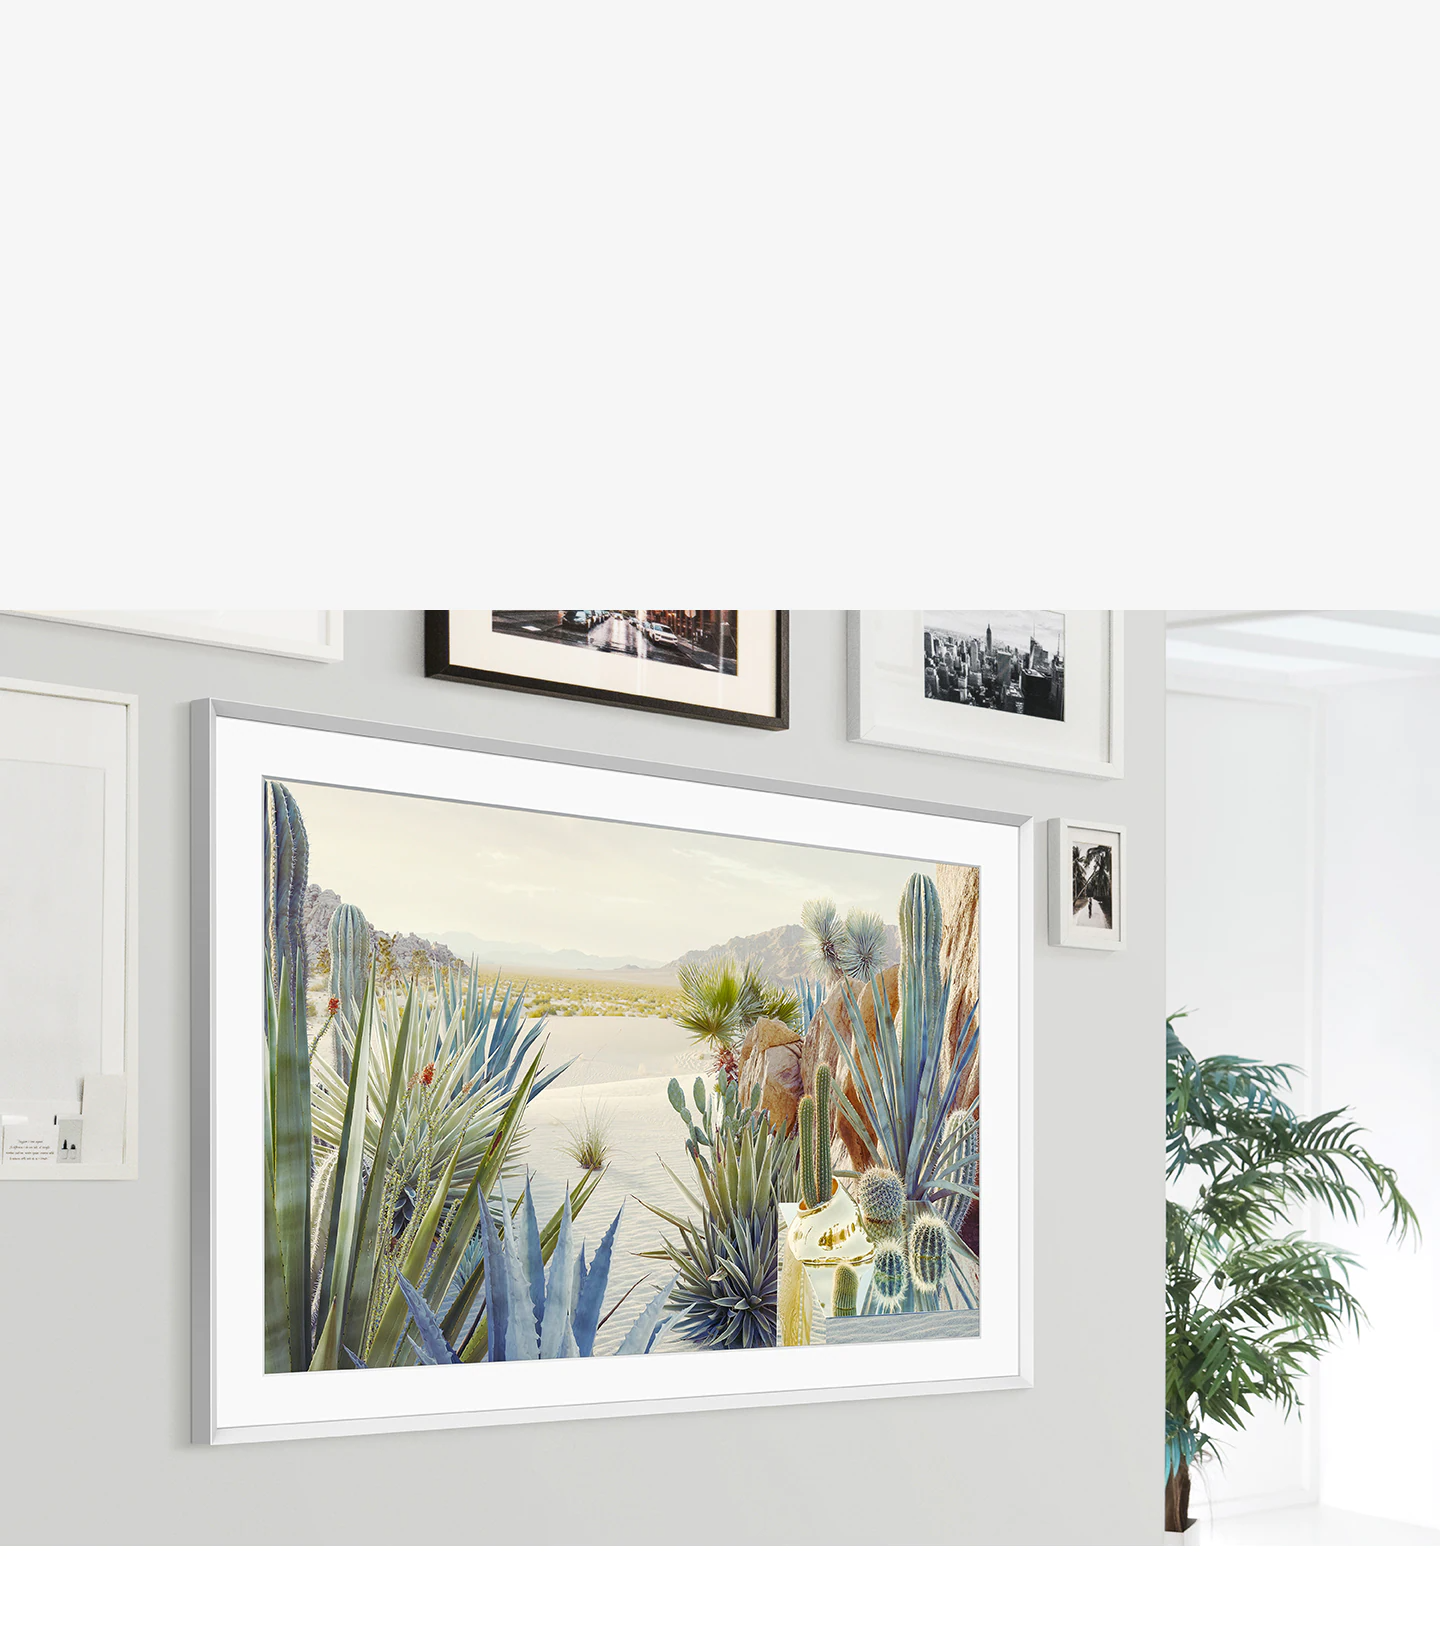 The Frame is mounted on the wall of a home interior and its modern frame design blends with the other picture frames on the wall.